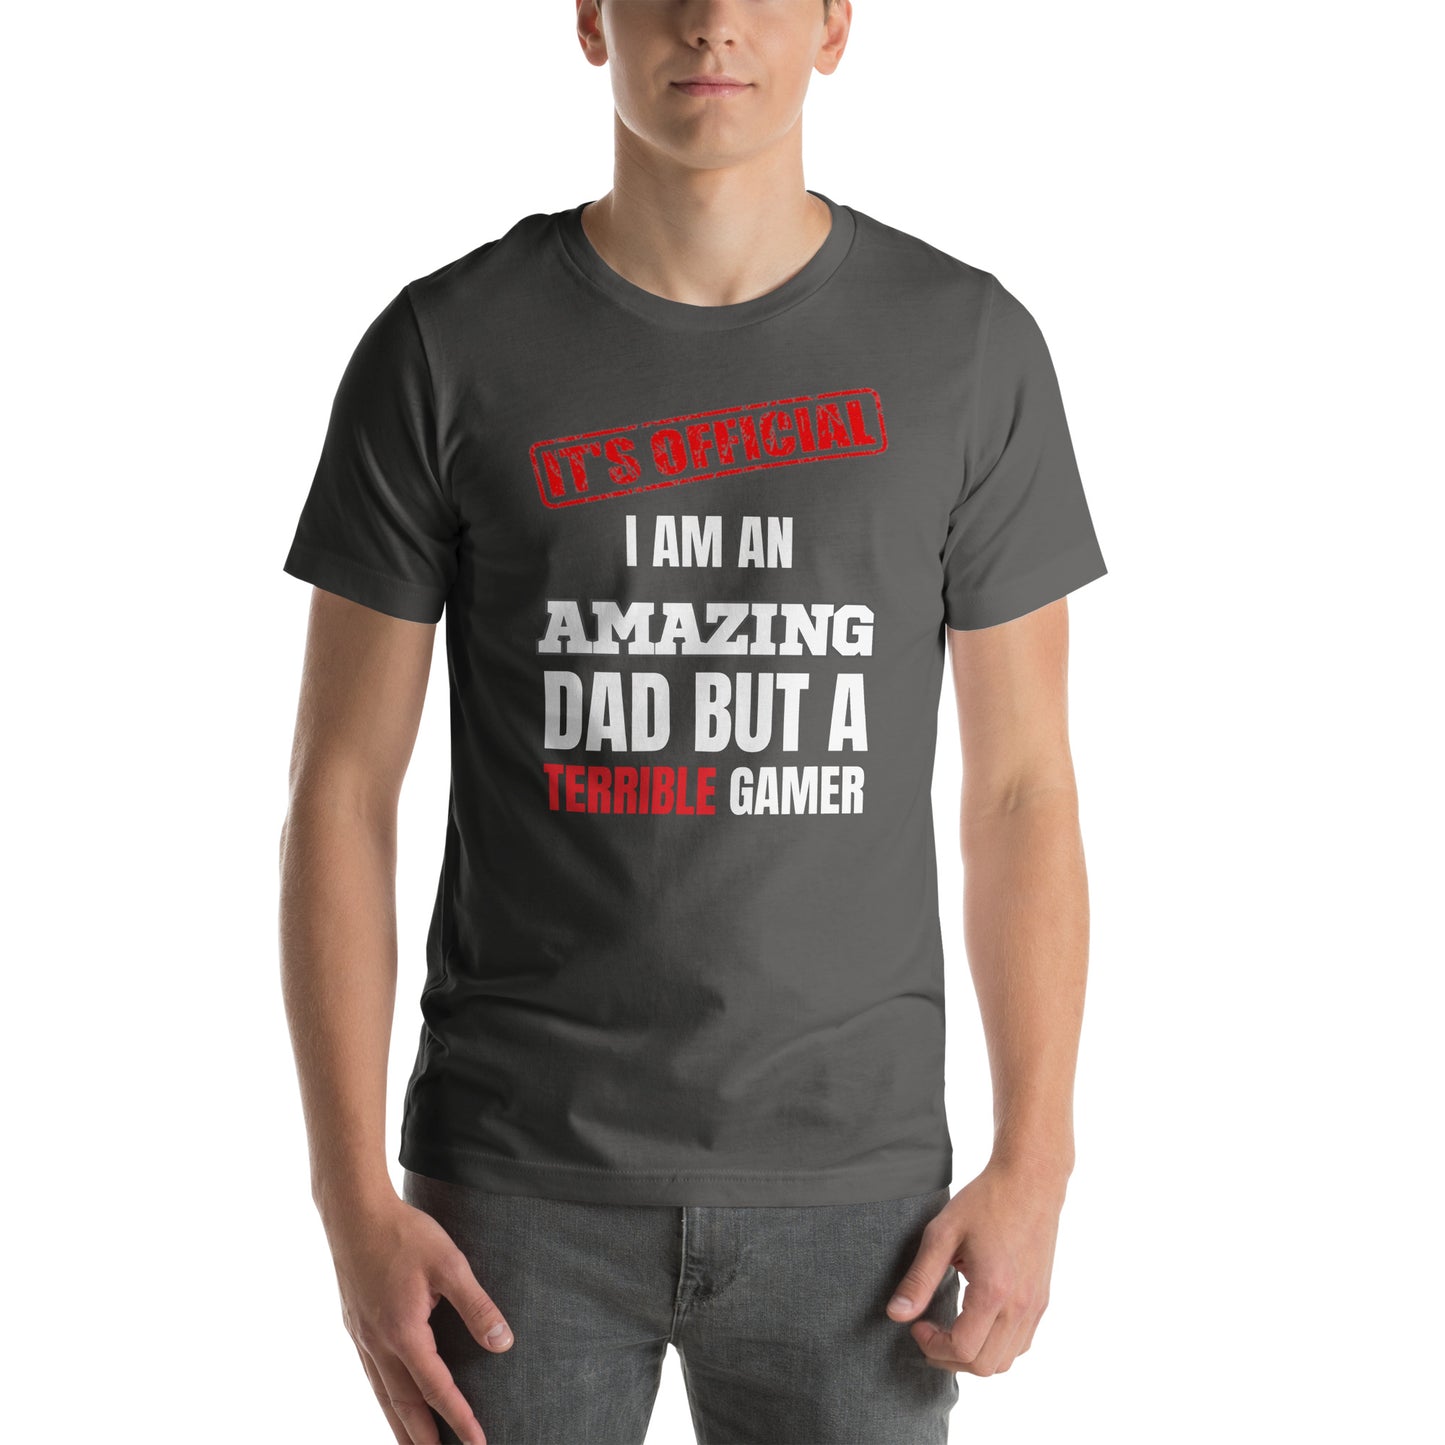 It's Official I Am an Amazing Dad | Men's Casual Tee | Funny Gamer Dad Shirt